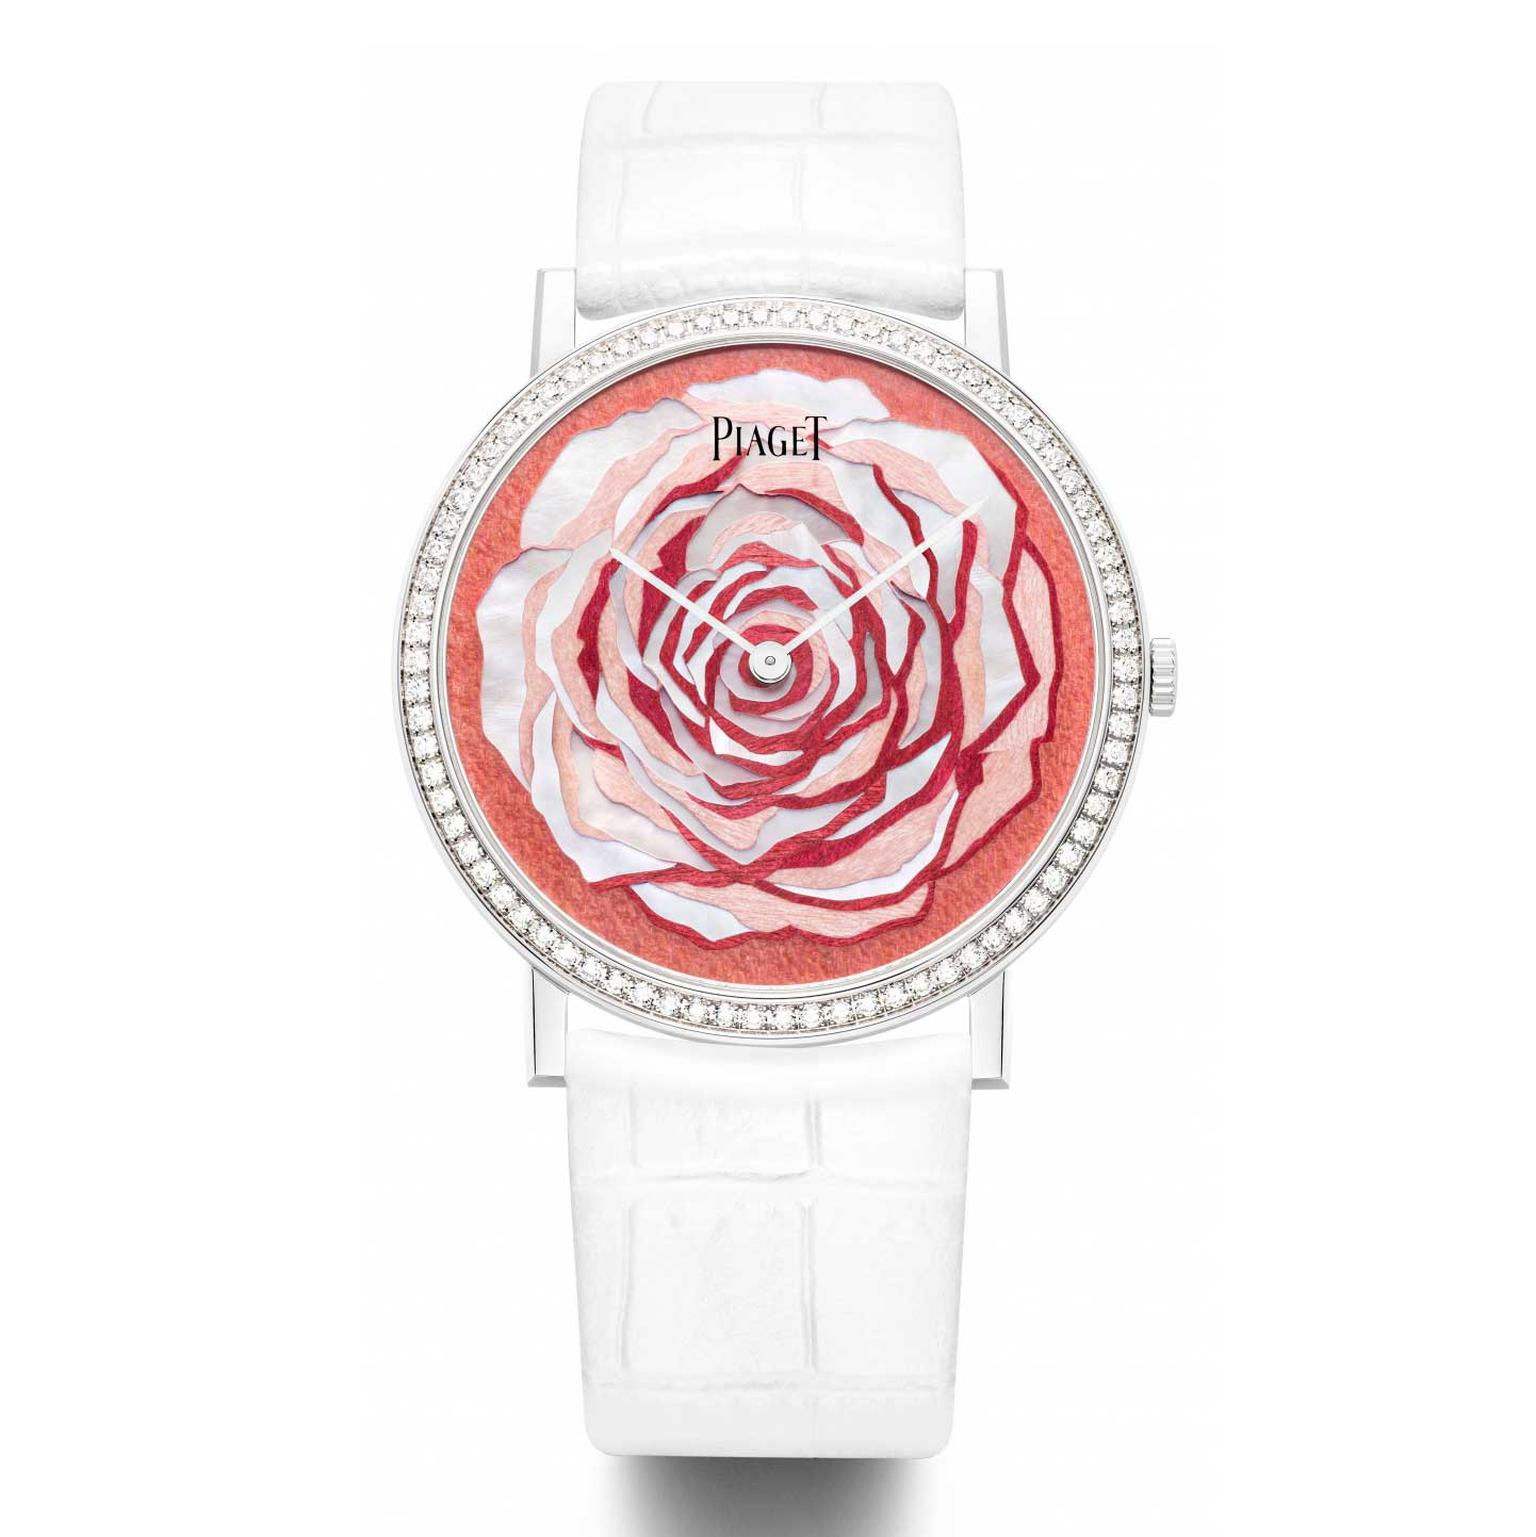 Piaget Altiplano dial in white mother-of-pearl and wood marquetry by Rose Saneuil